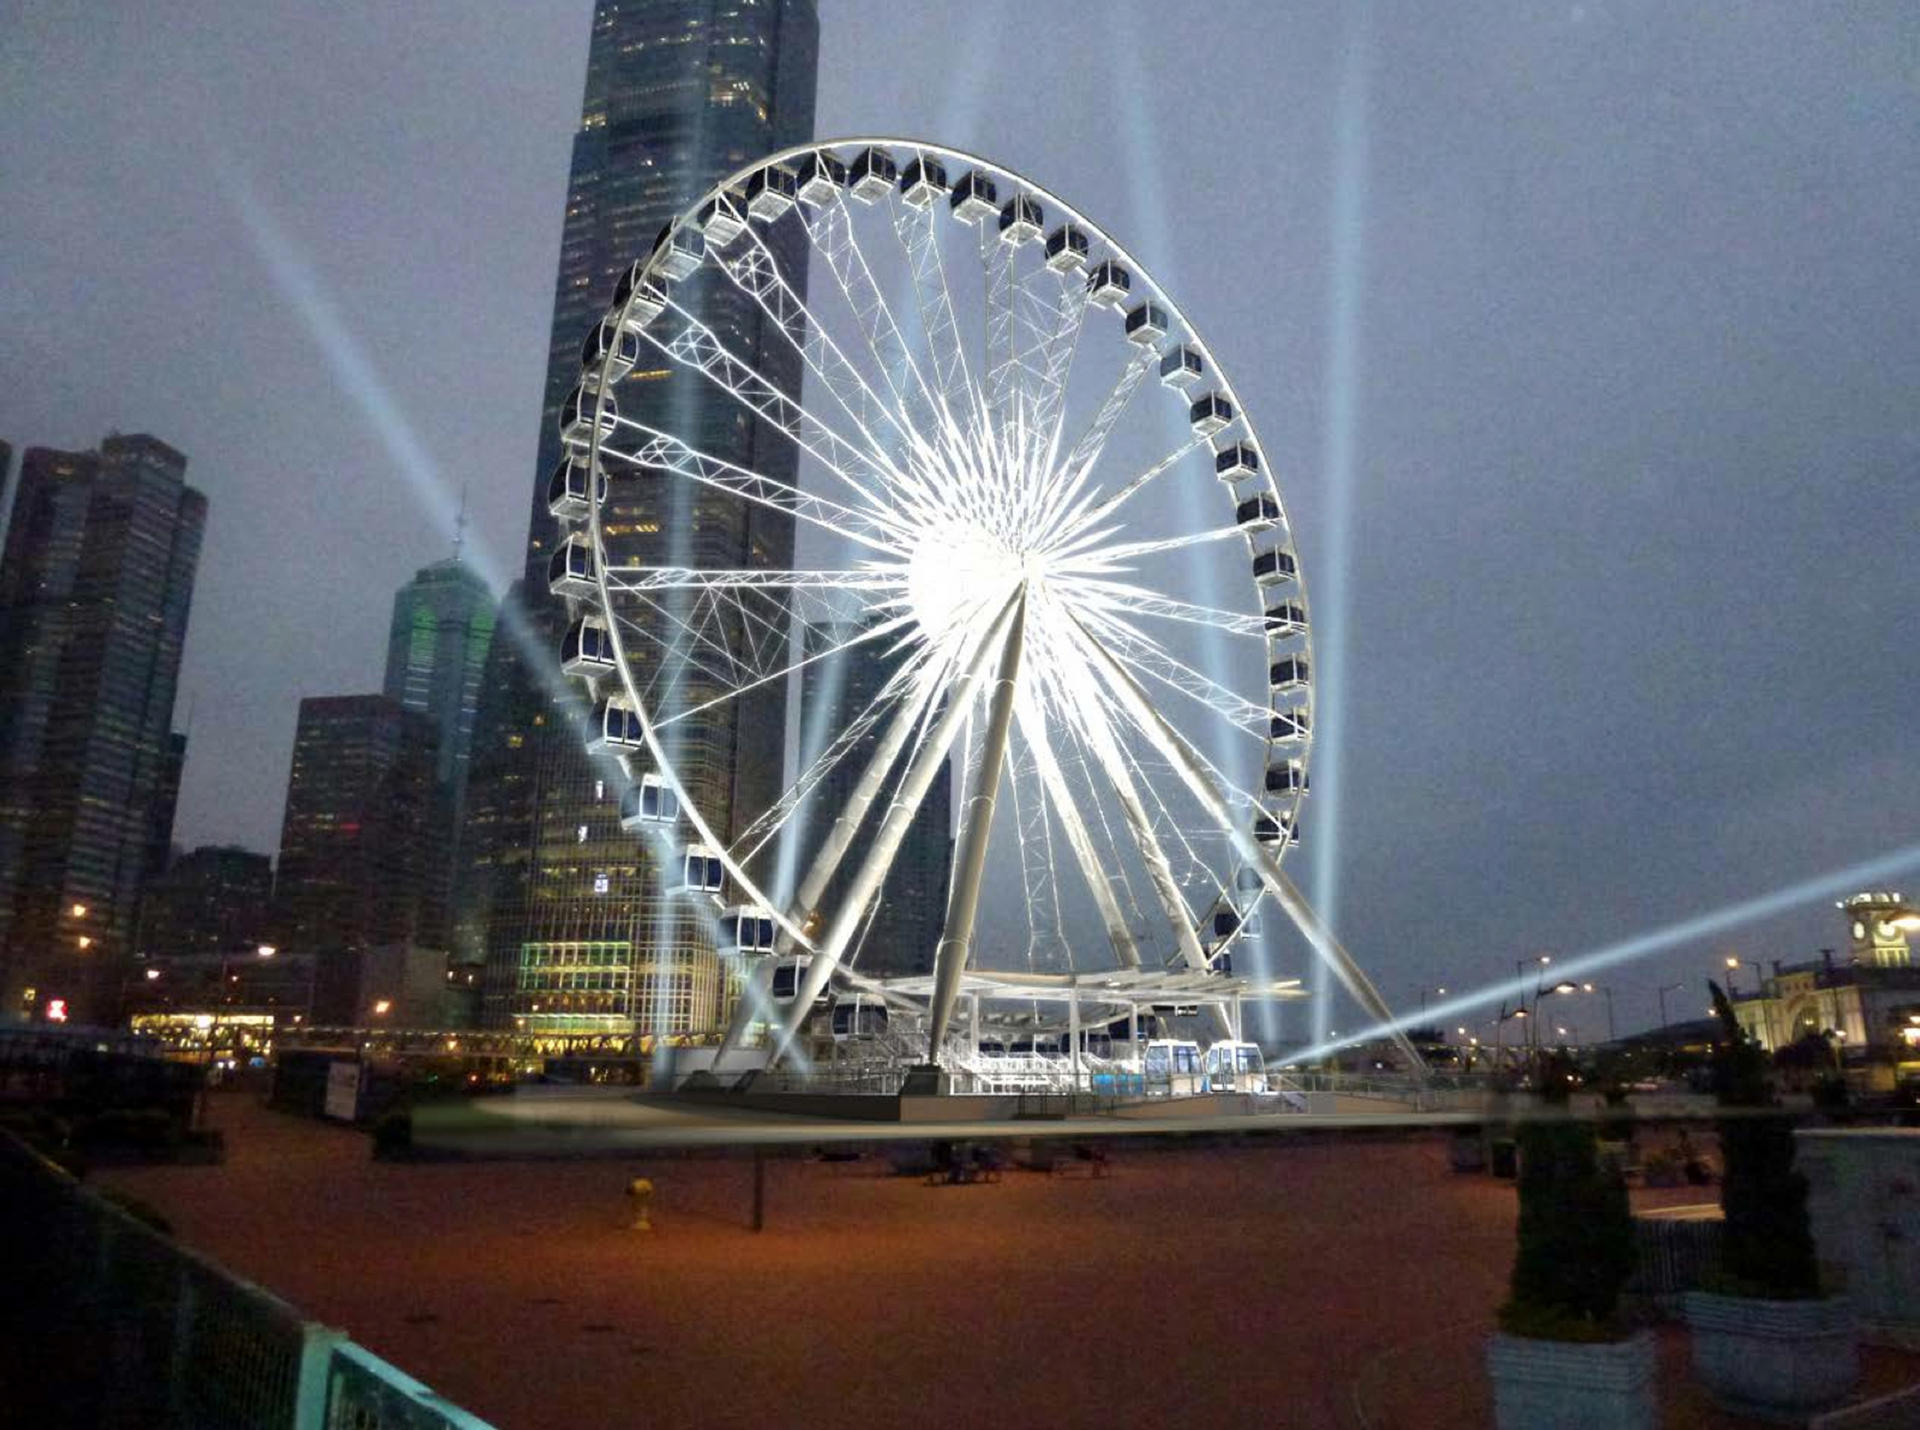 How the Hong Kong observation wheel will look when it is finally opened - it will have 42 gondolas and offer spectacular views over Victoria Harbour. Photo: SCMP Pictures